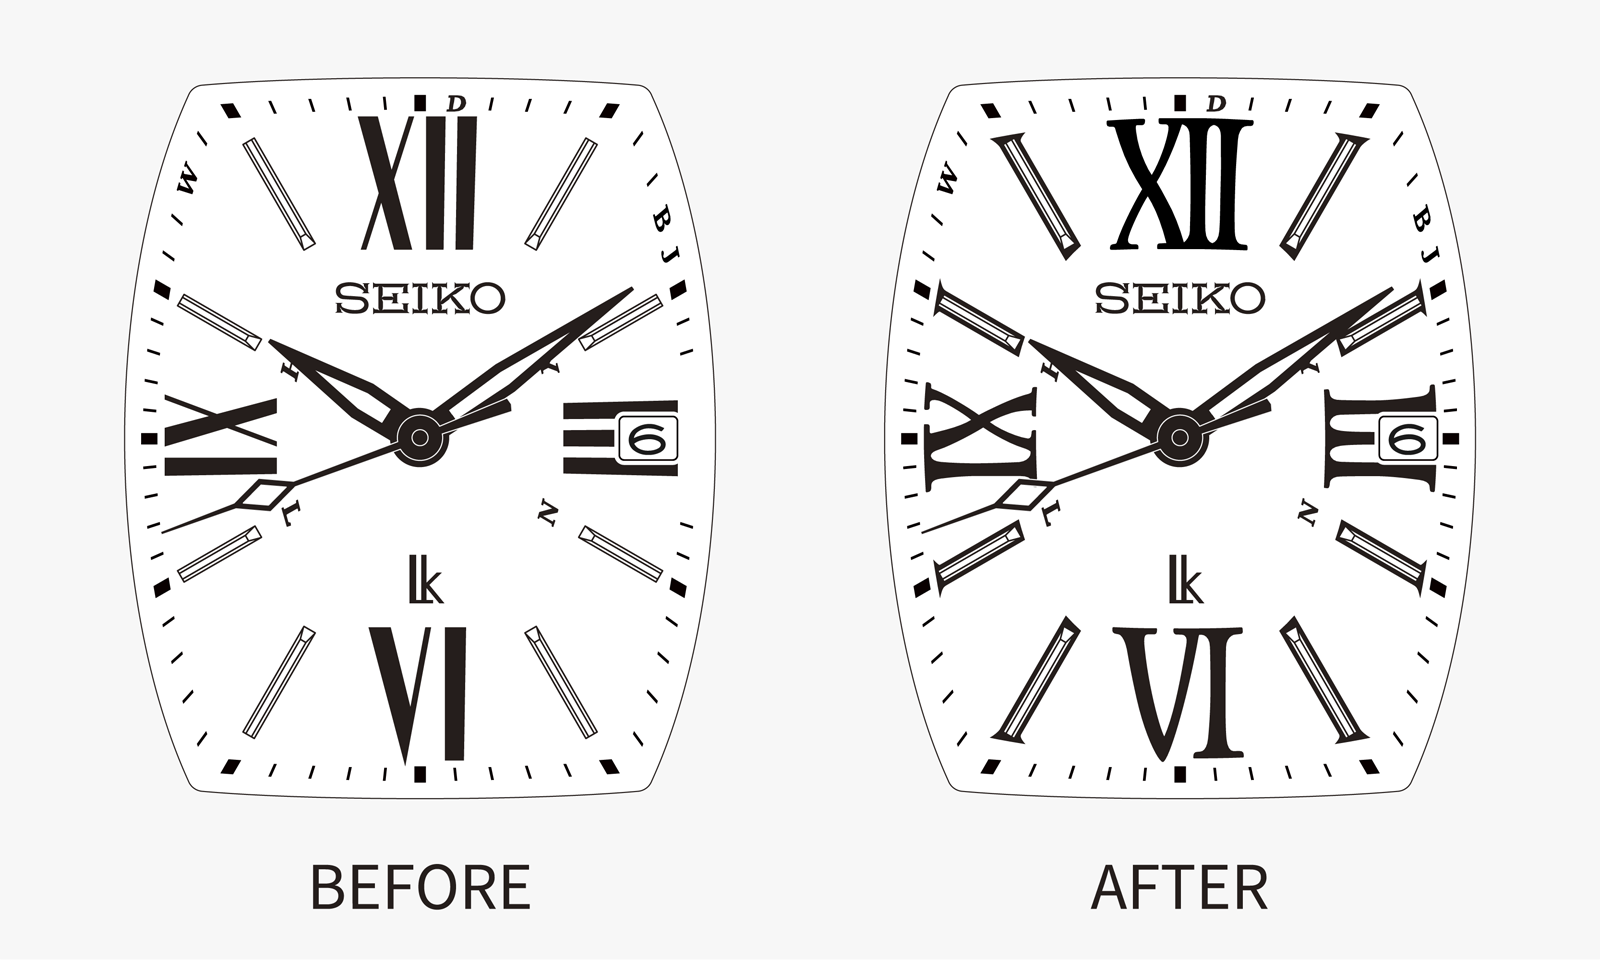 Two comparison images of Roman numerals printed on SSVW030, with and without serifs, before and after